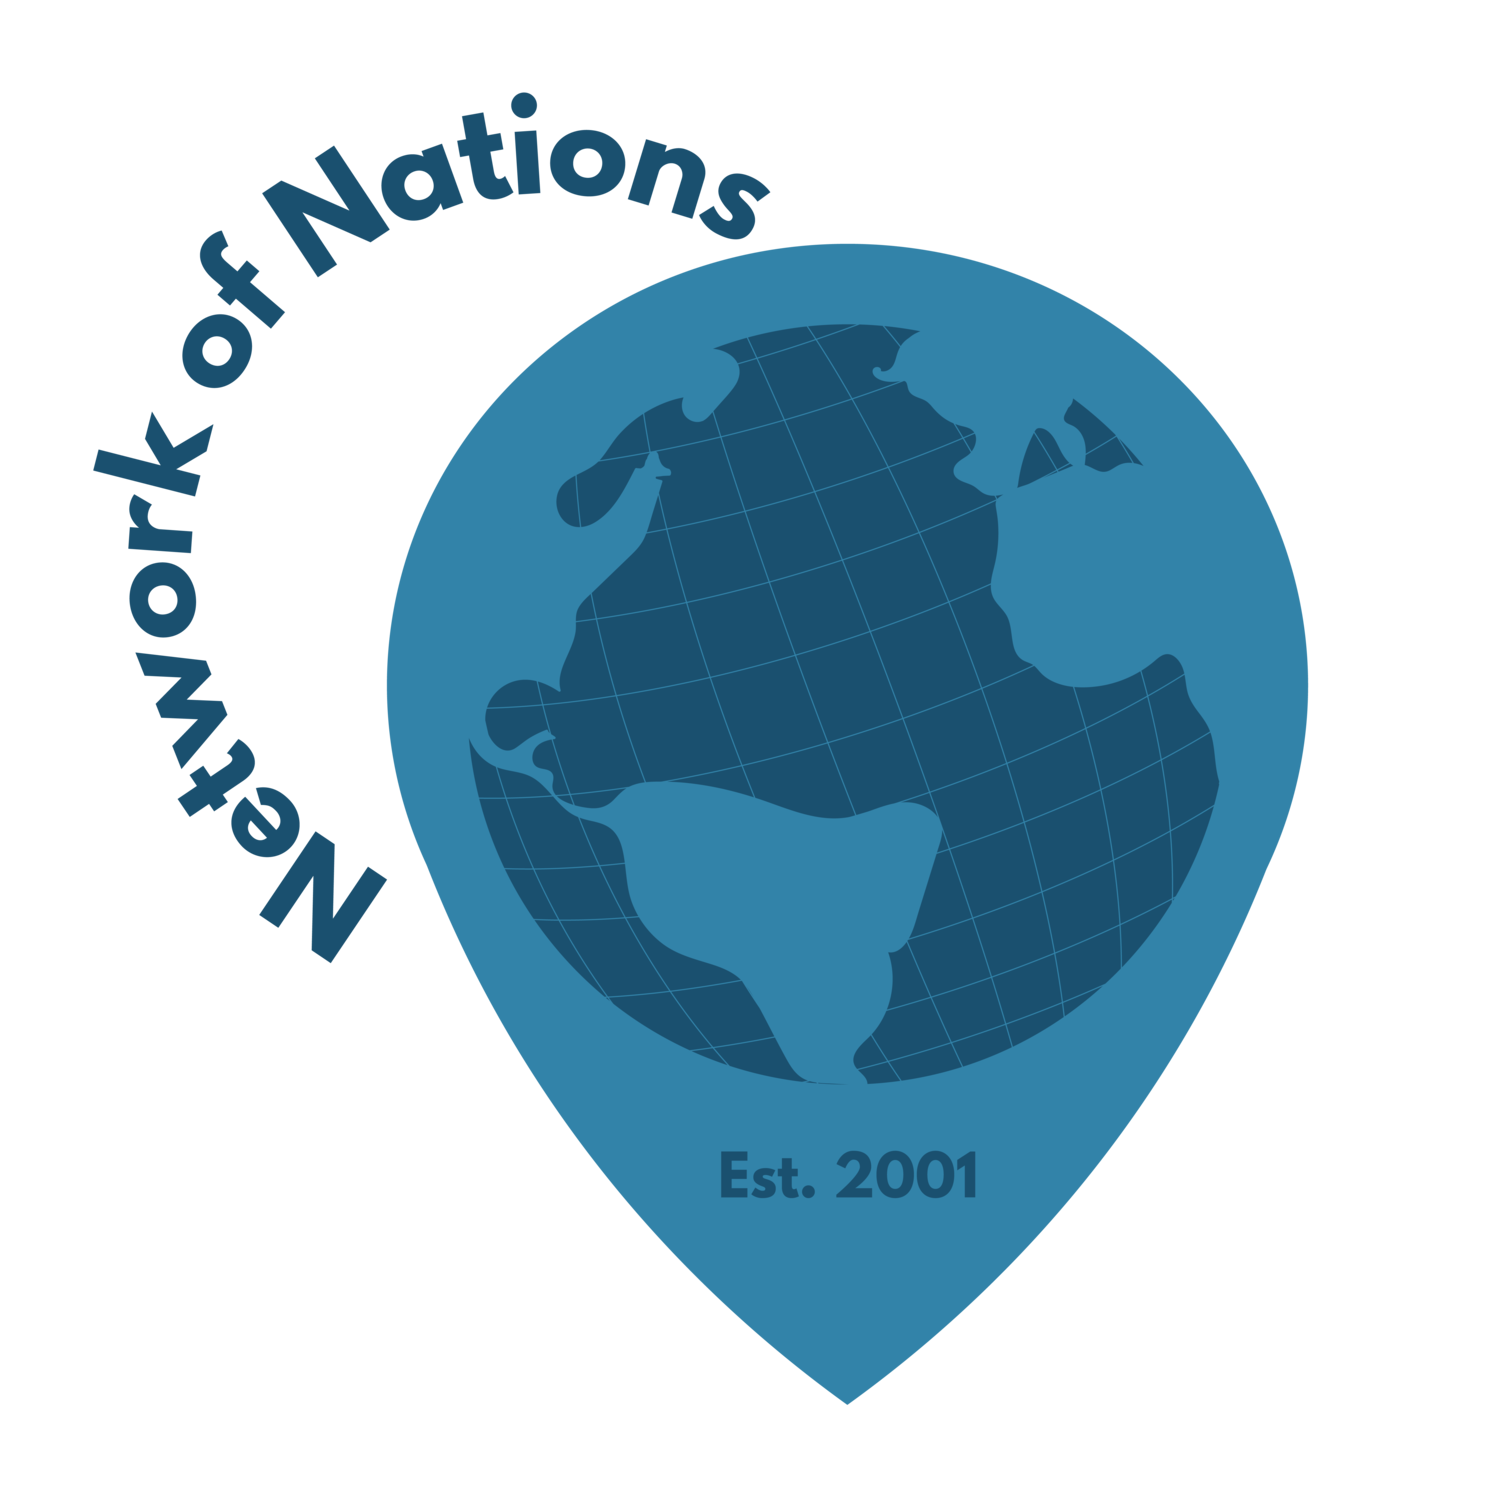 Network of Nations